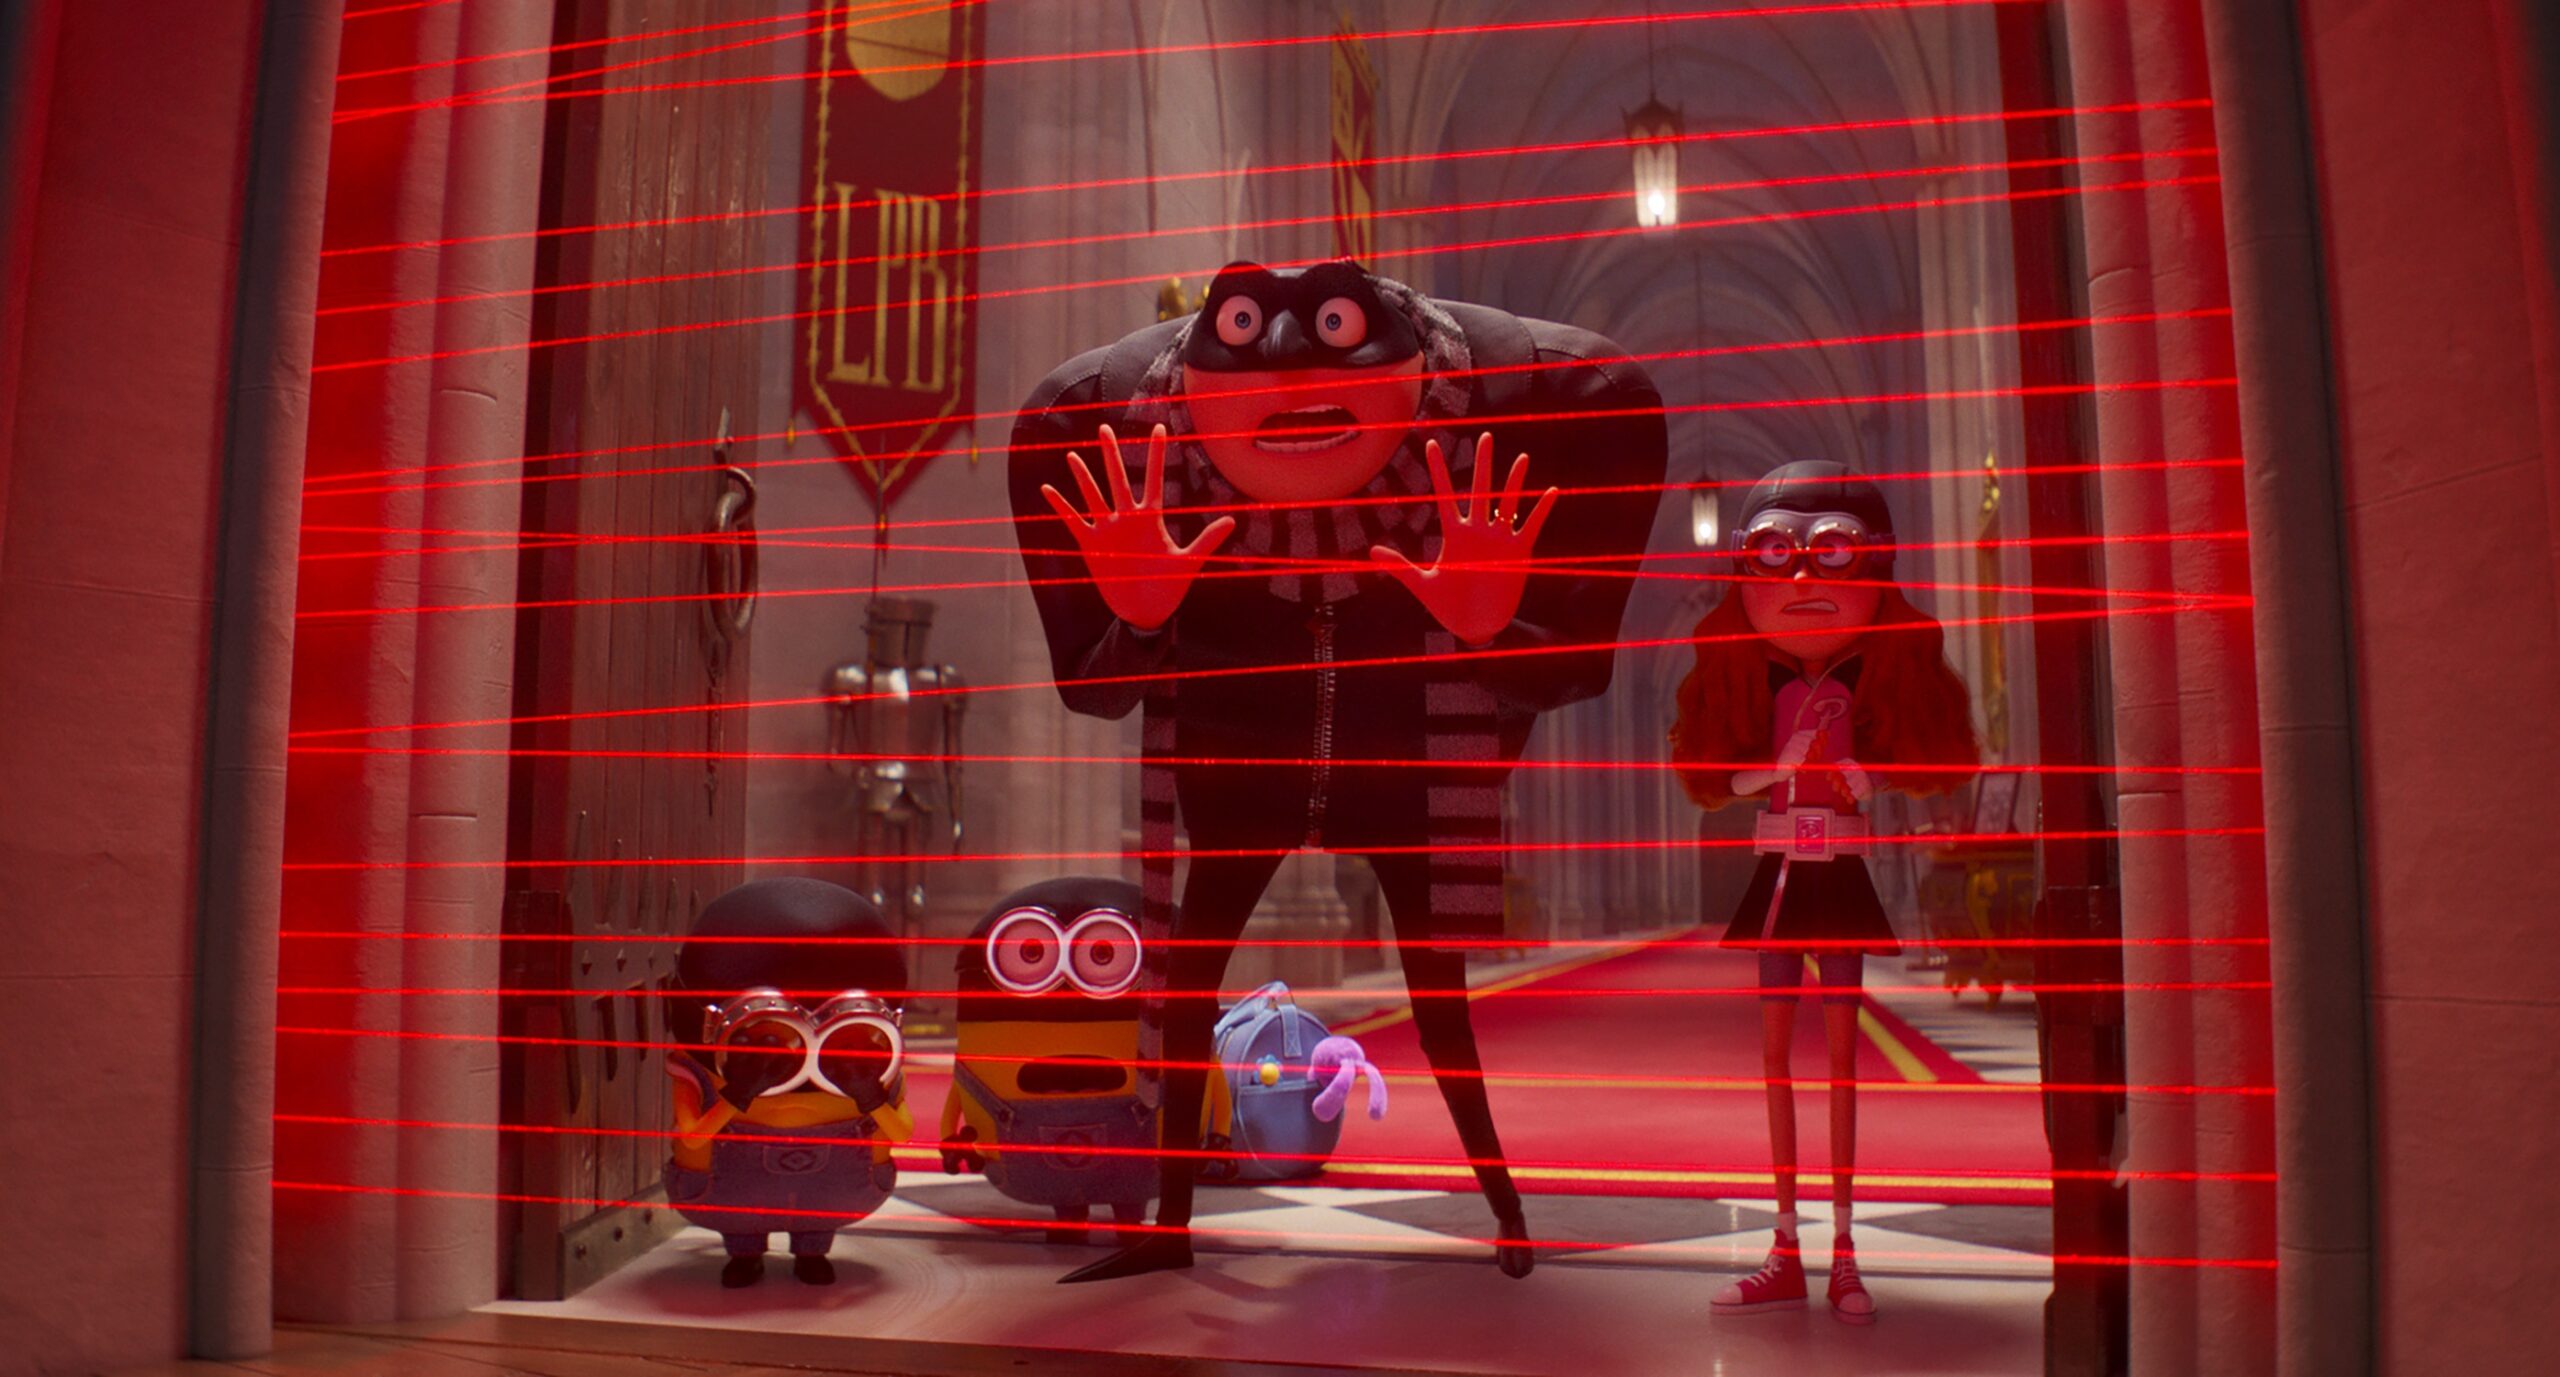 L-R: Minions (Pierre Coffin), Gru (Steve Carell) and Poppy Prescott (Joey King) in Despicable Me 4, directed by Chris Renaud.